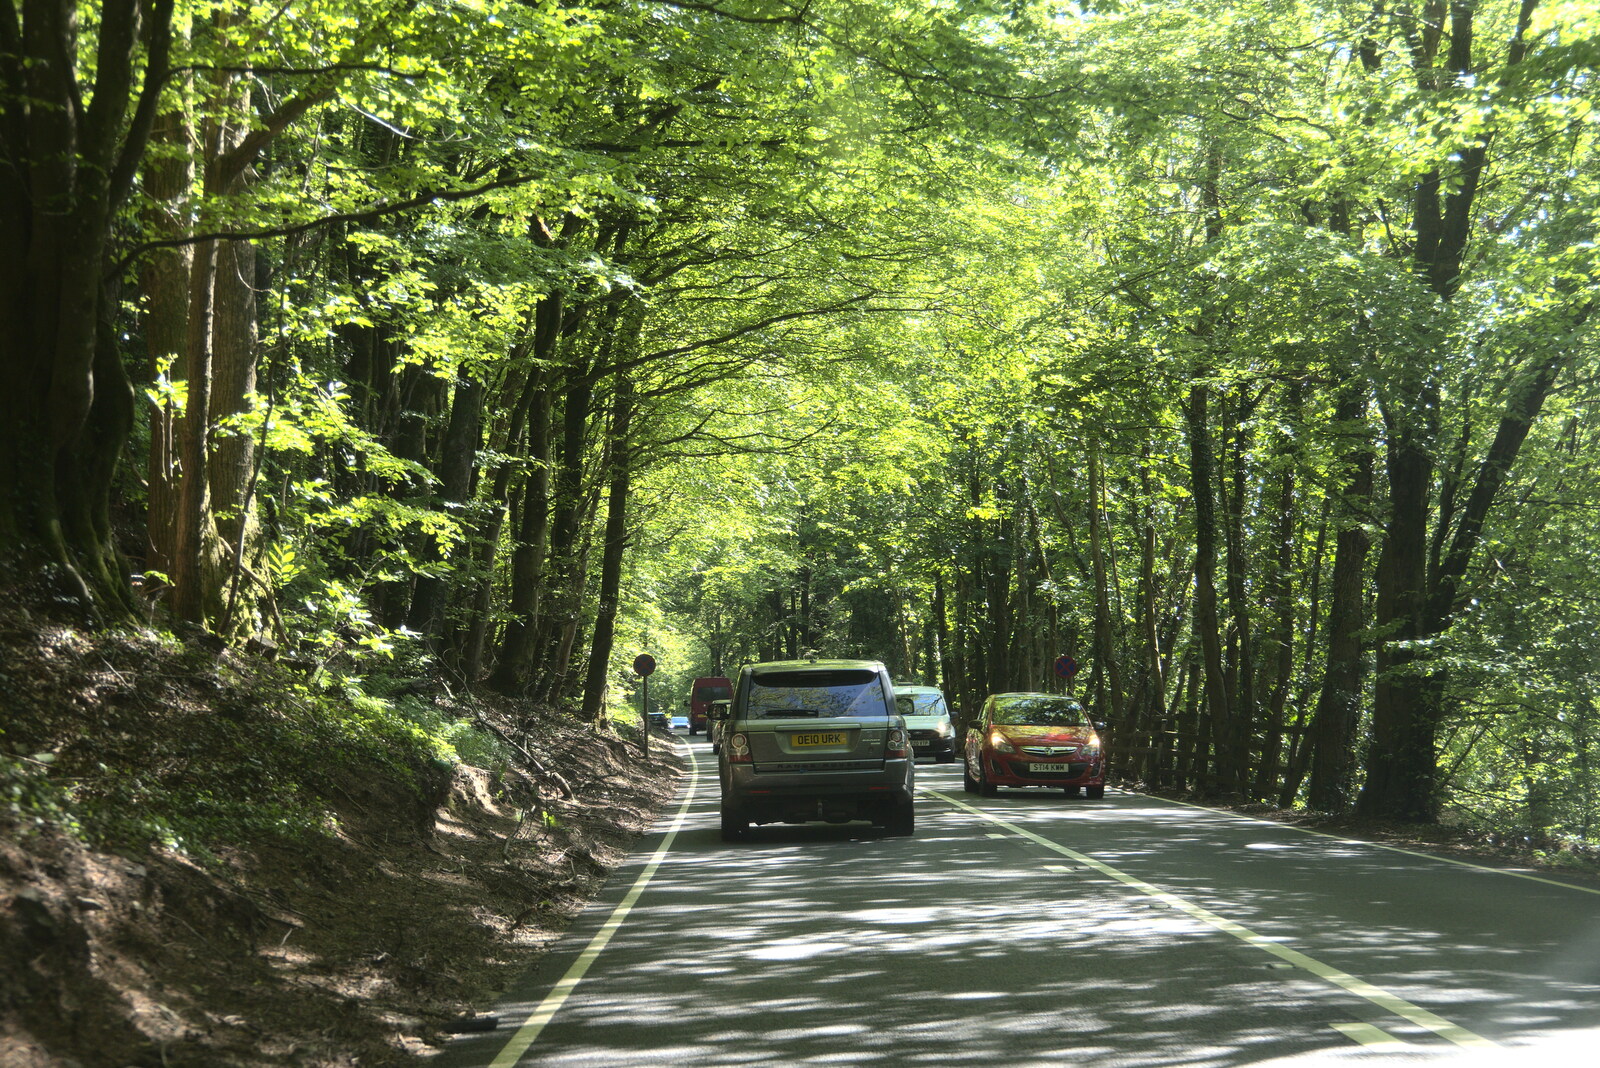 A nice tree tunnel on the A303 from A Trip to Grandma J's, Spreyton, Devon - 2nd June 2021